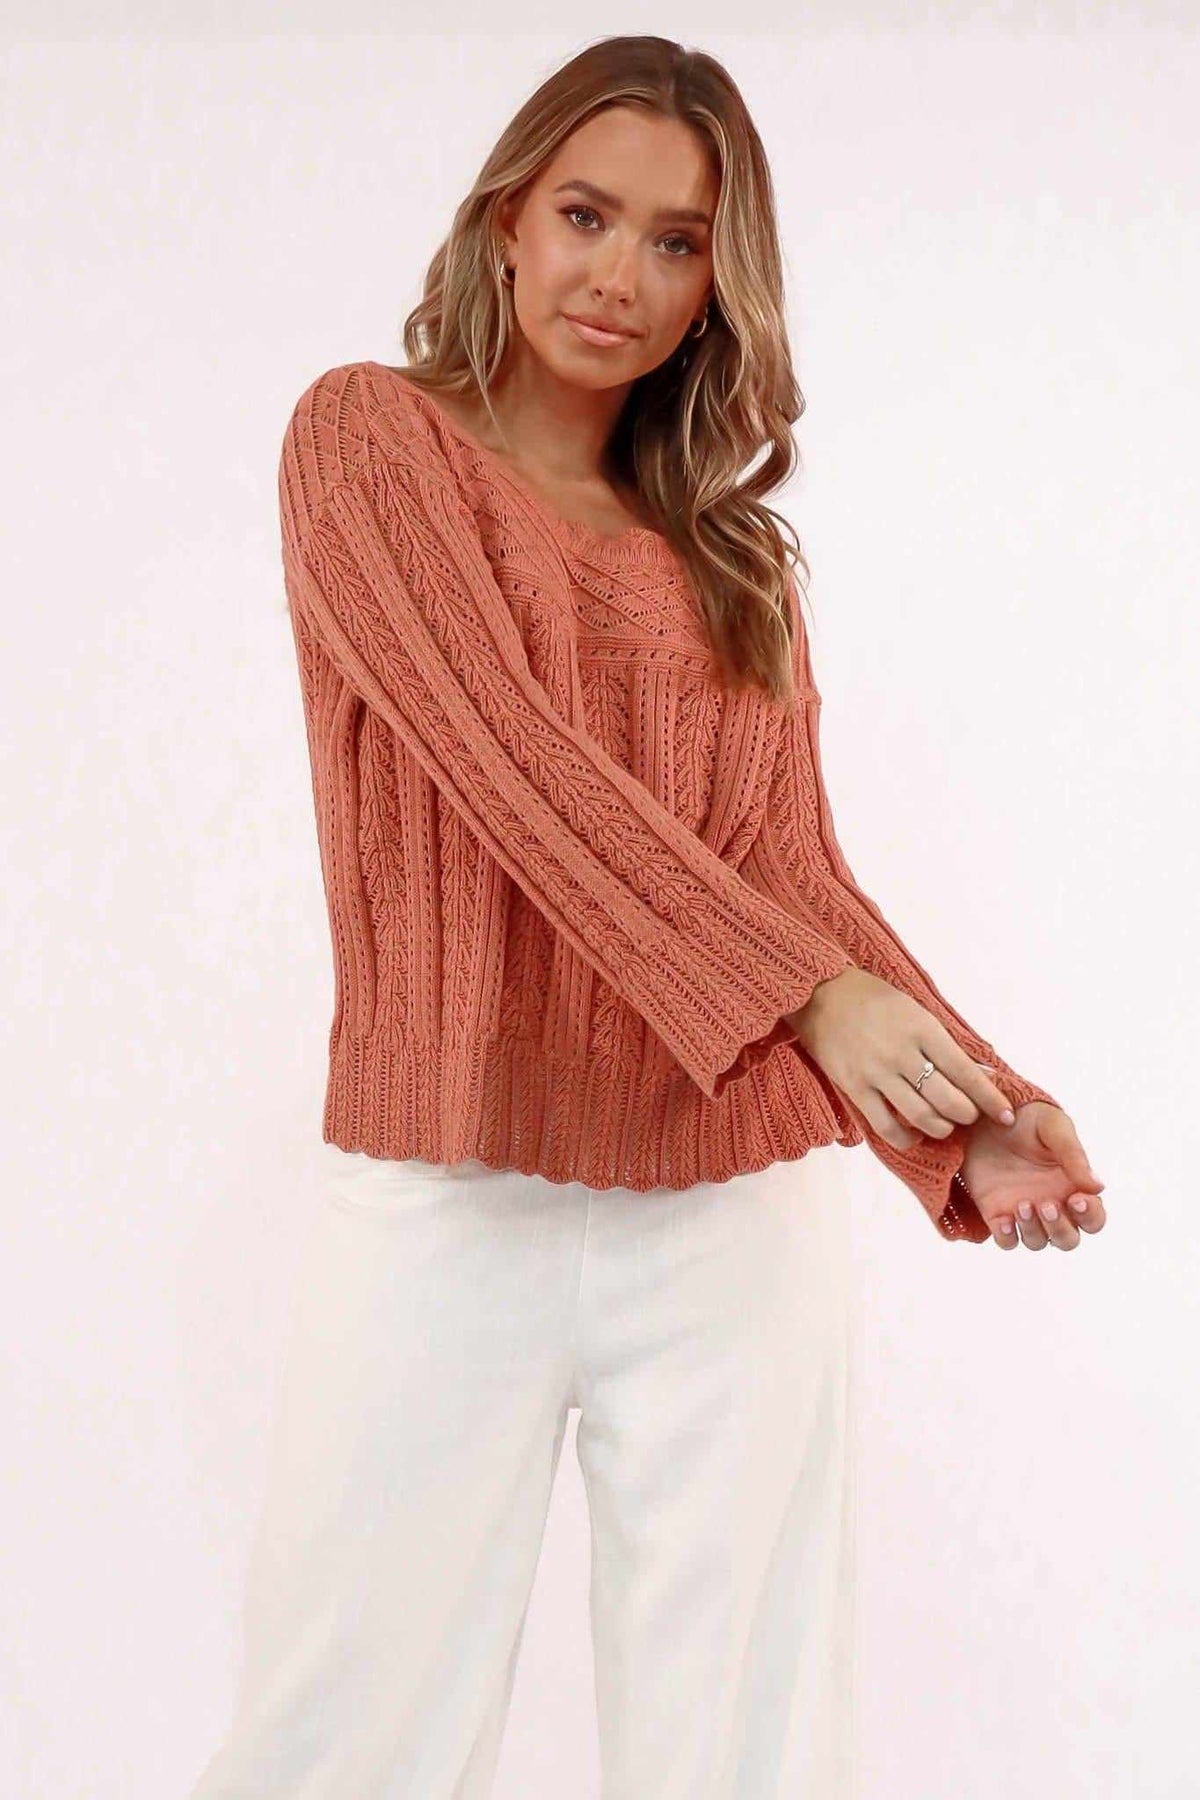 Gillia Top, COTTON, LONG SLEEVE, ORANGE, Sale, TOP, TOPS, Our New Gillia Top Is Now Only $61.00 Exclusive At Mishkah, Our New Gillia Top is now only $61.00-We Have The Latest Women&#39;s Tops @ Mishkah Online Fashion Boutique-MISHKAH